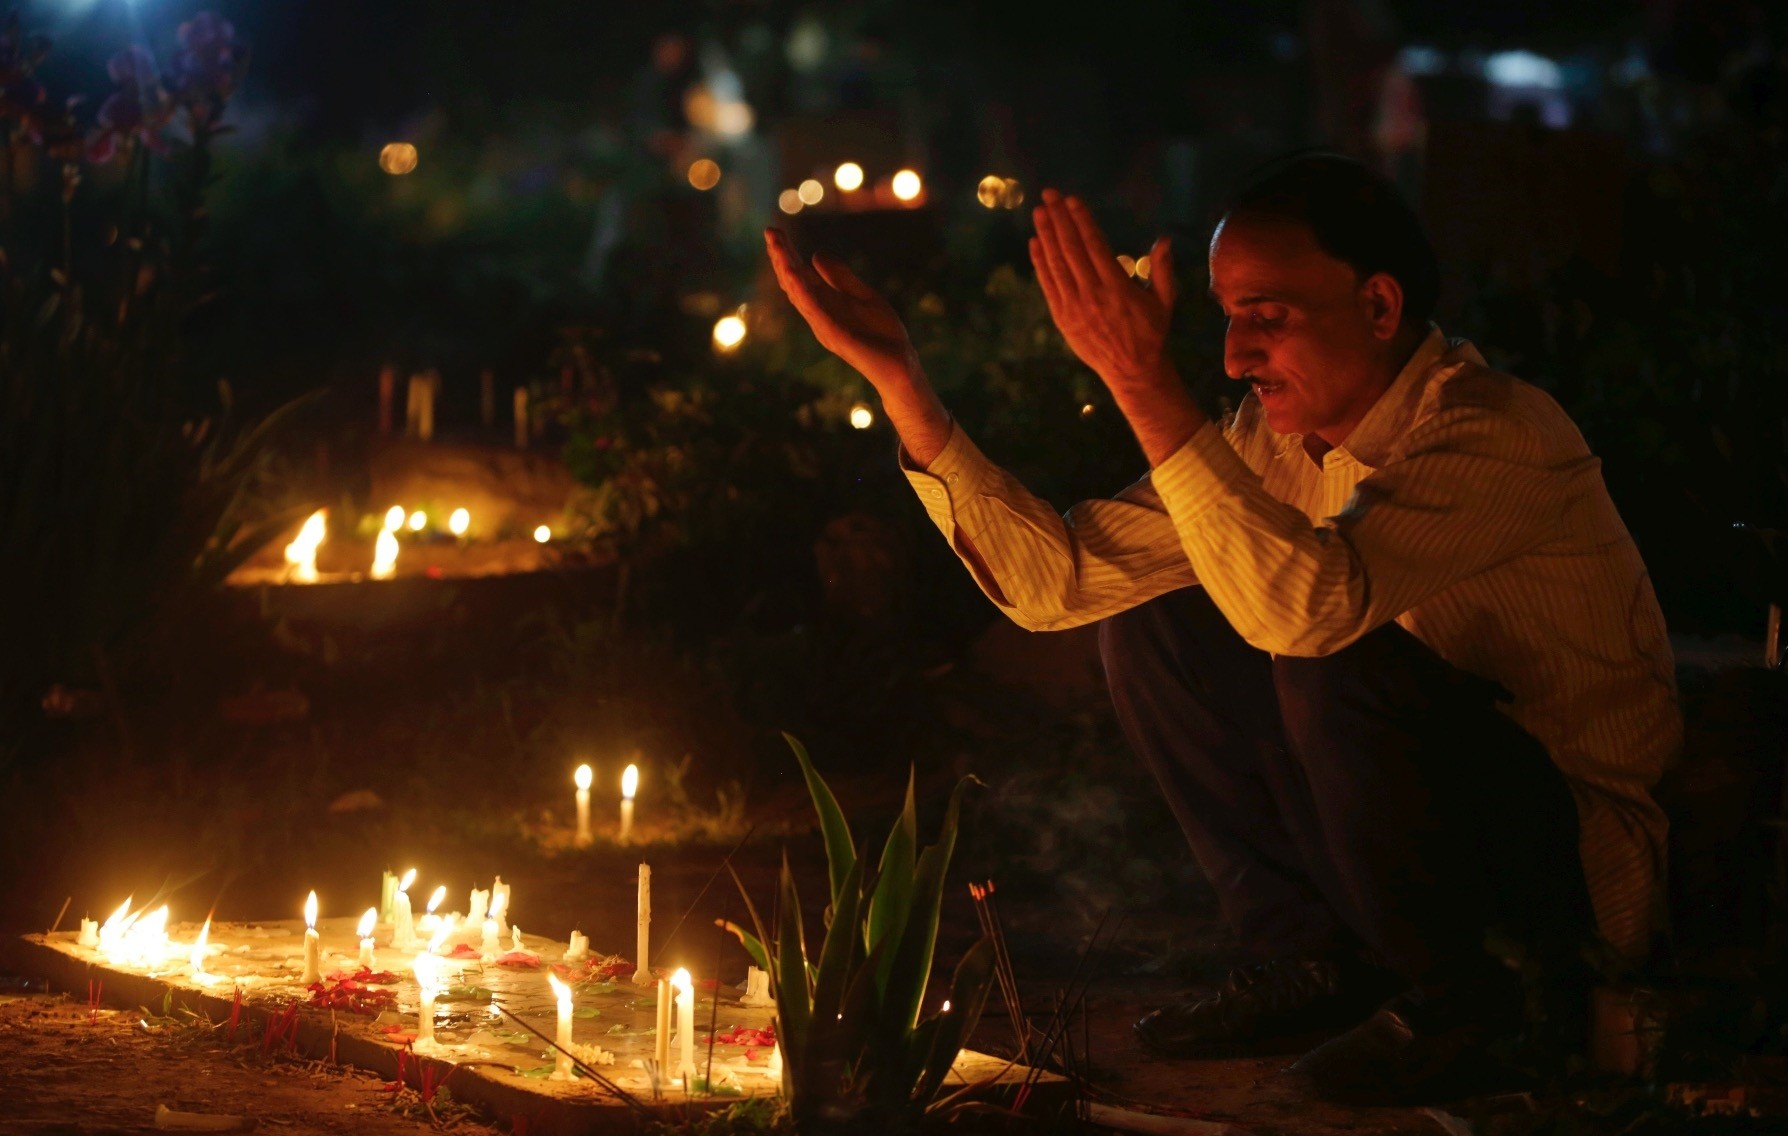 A Kashmiri Muslim prays as he lights candles at the grave of his relative to mark Shab-e-Barat, one of the holiest nights on the Islamic calendar.